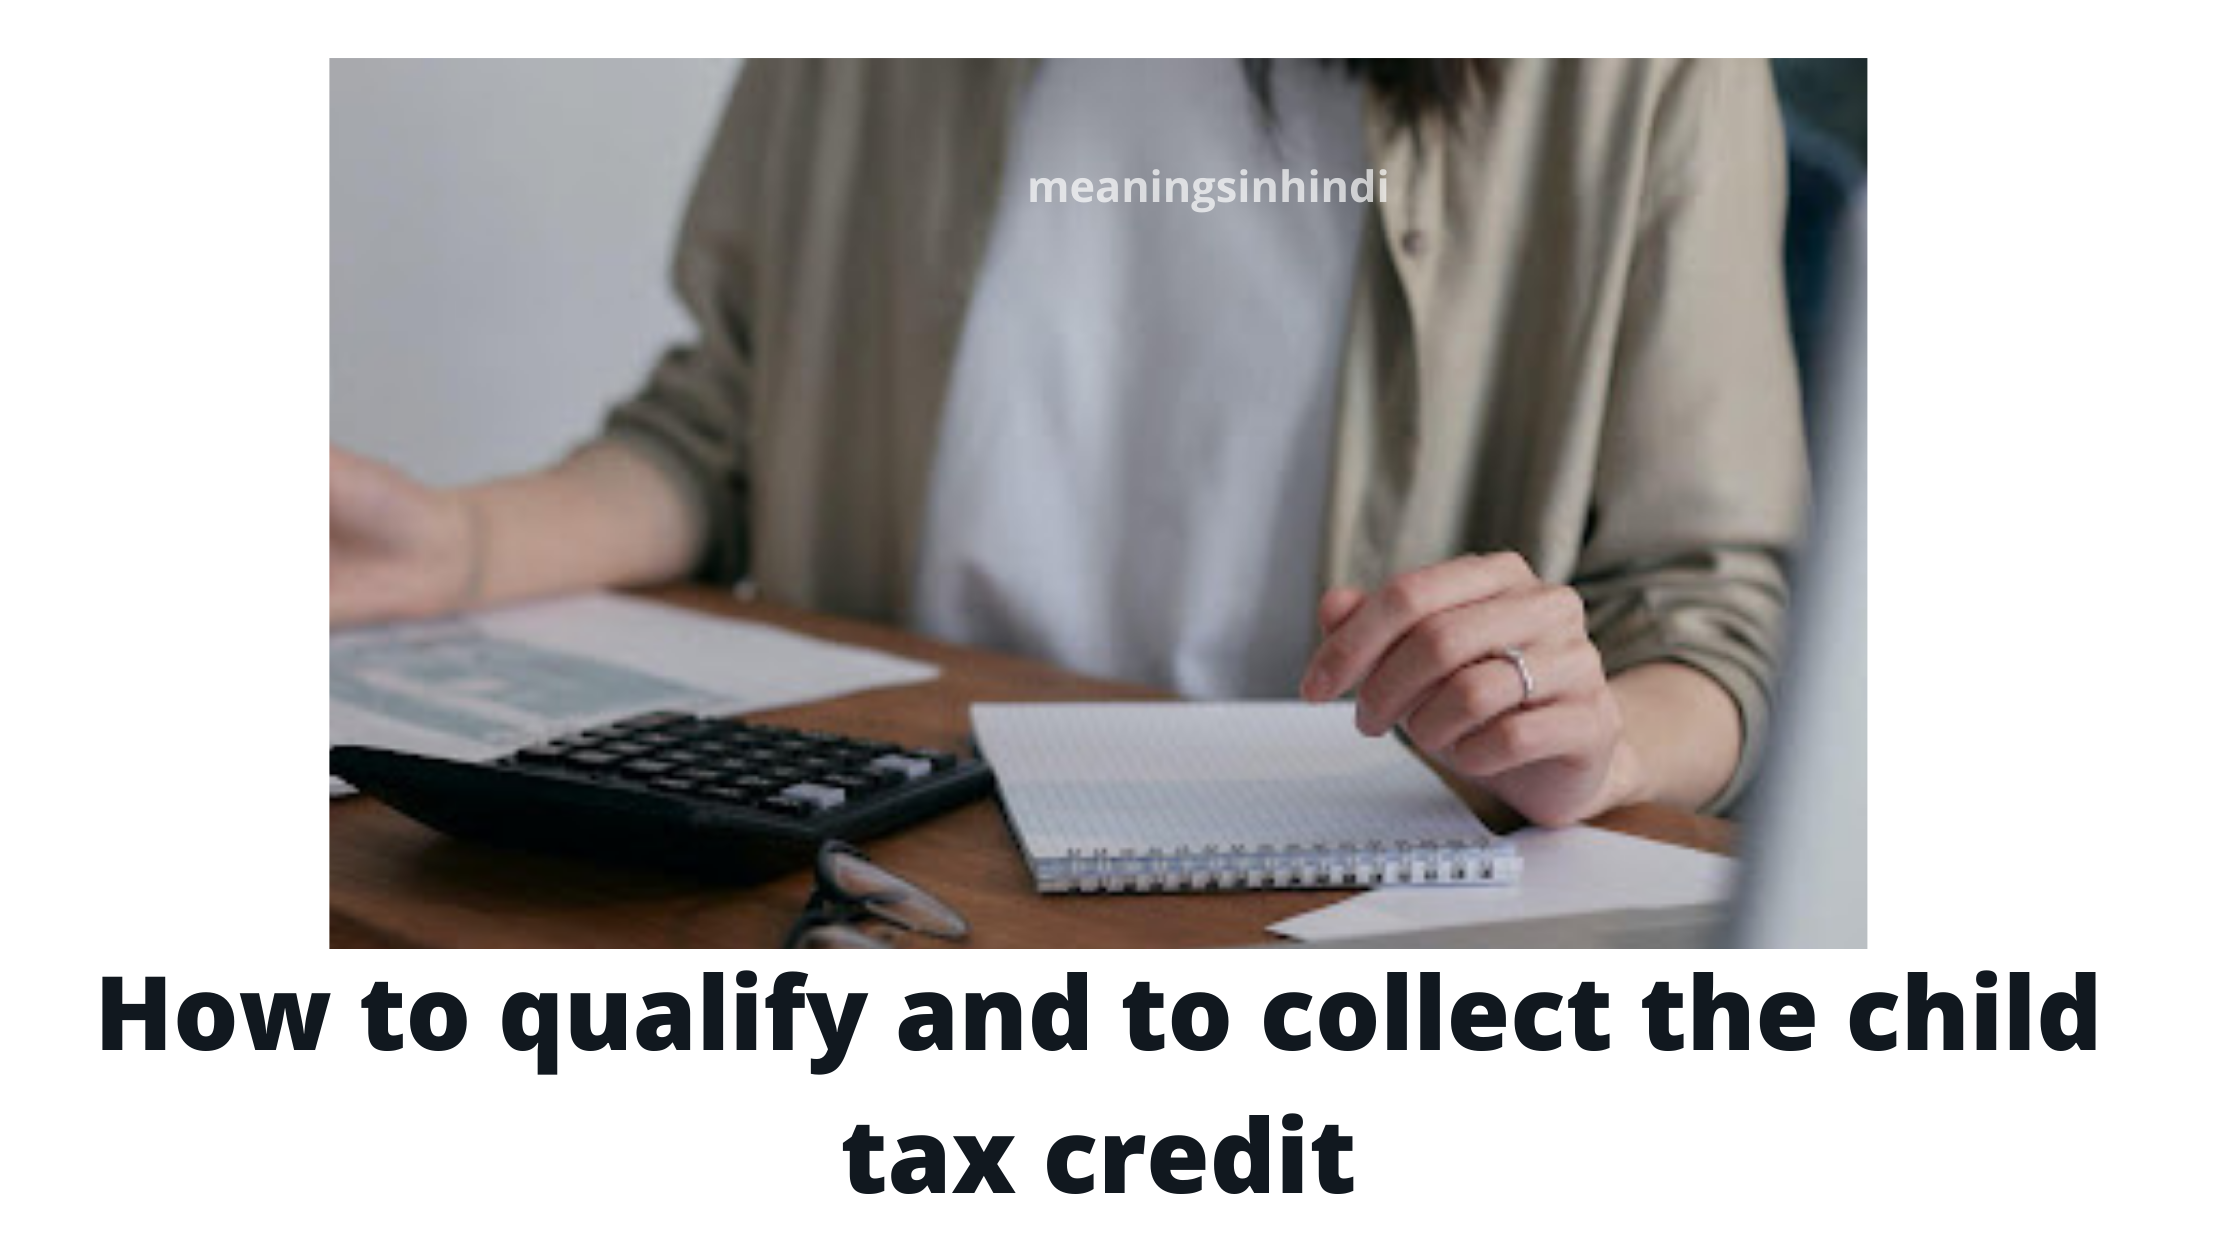 How to qualify and to collect the child tax credit